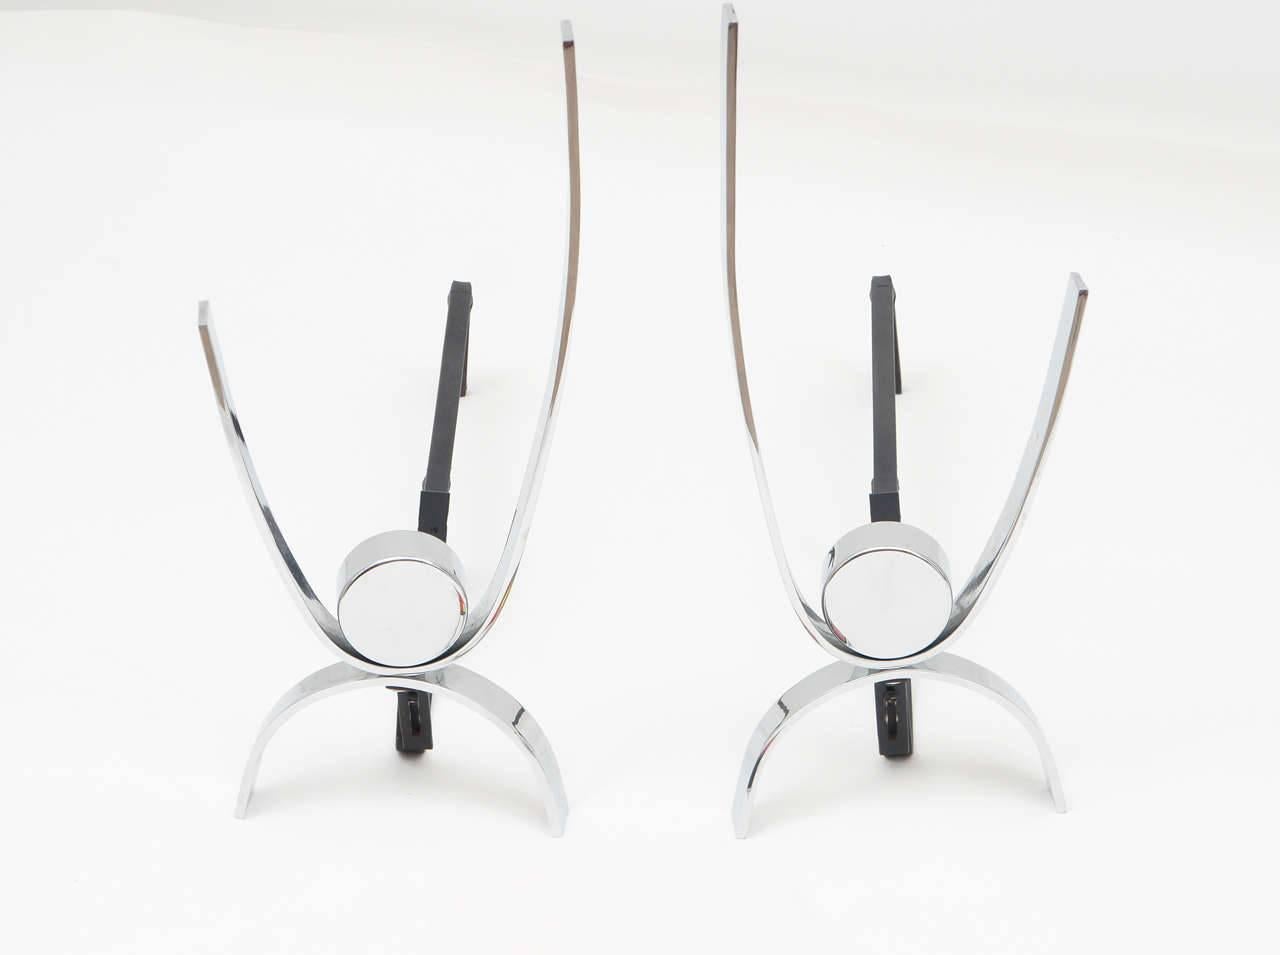 Clean, classic chrome andirons by this renowned Mid-Century designer. Simply elegant!